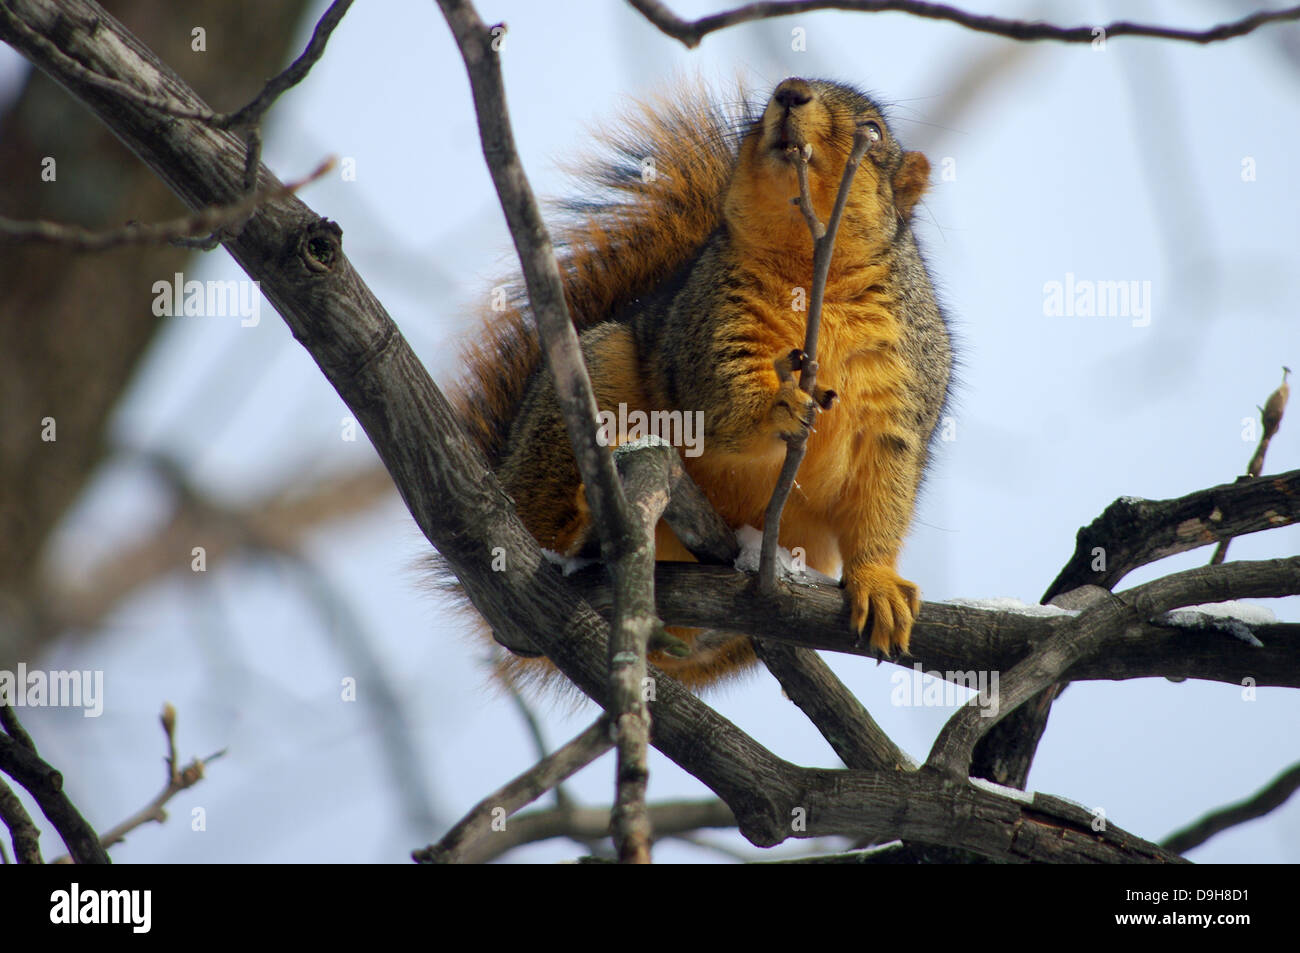 Charming Charlie the Eastern Red Fox Squirrel eating a Hickory Tree bud. Stock Photo